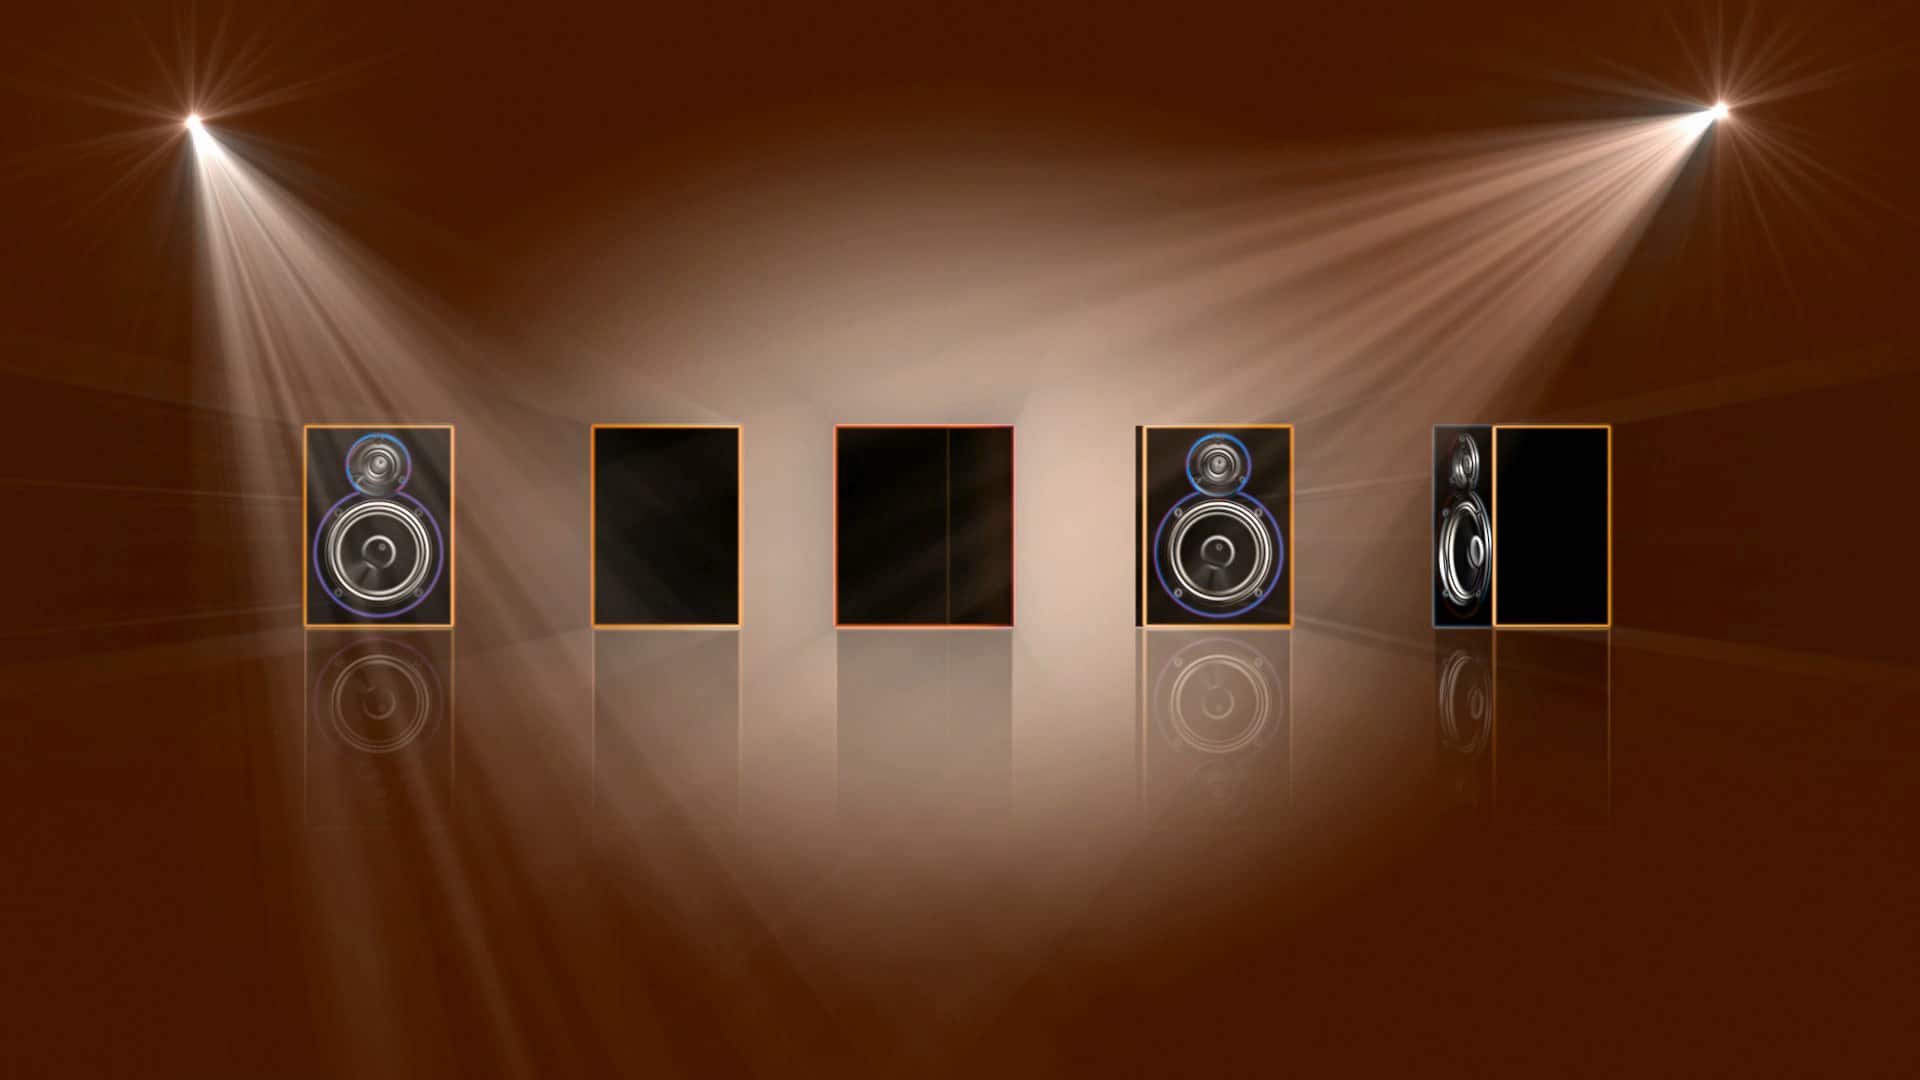 Music Video Menu Background with Speakers and Amplifiers - Free Video  Footage